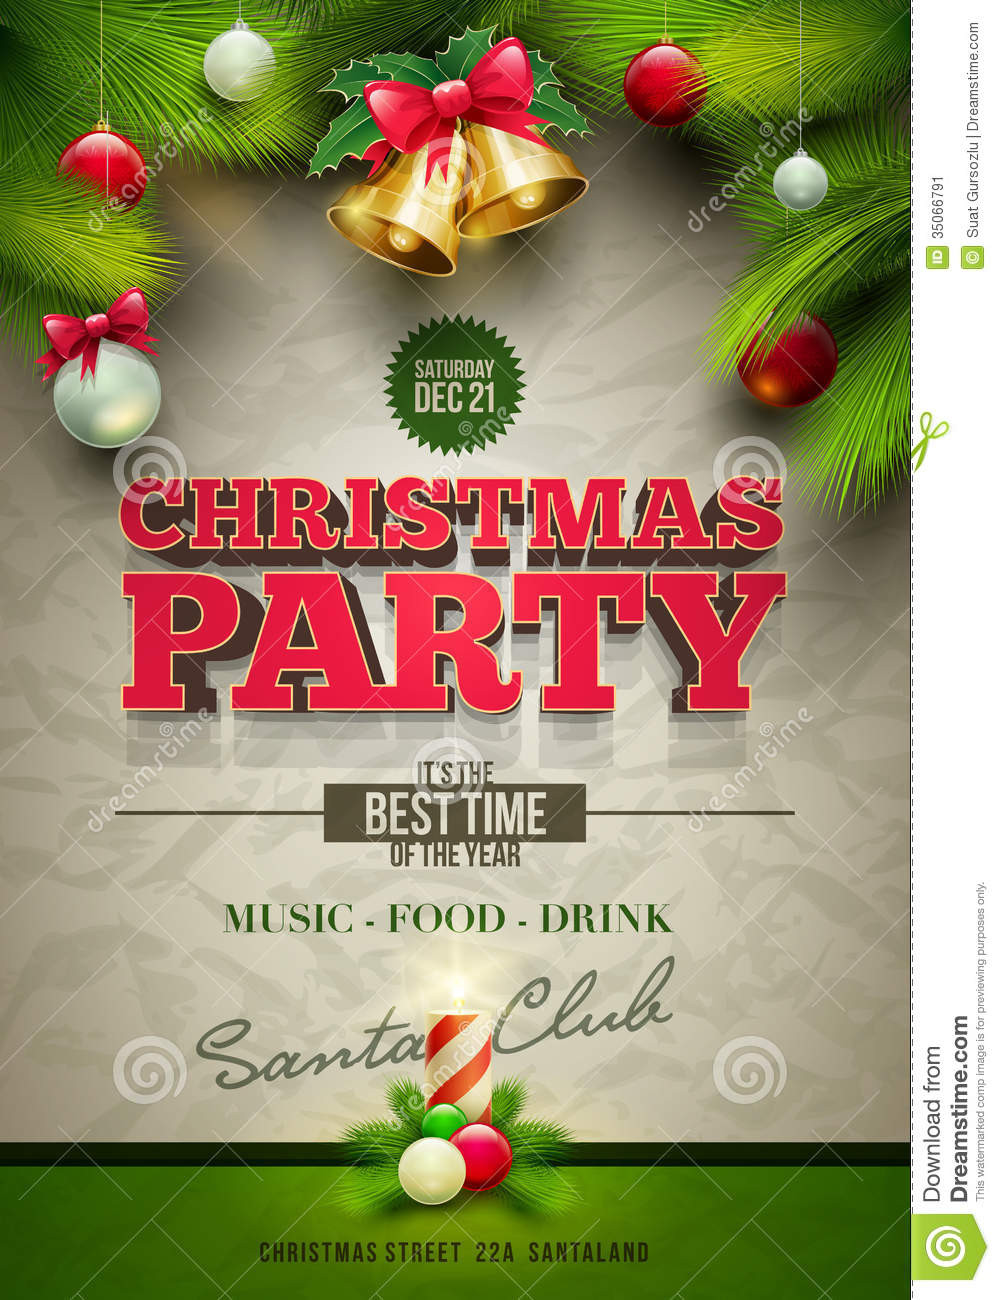 Christmas Party Posters Ideas
 Christmas Party Poster Stock Image Image